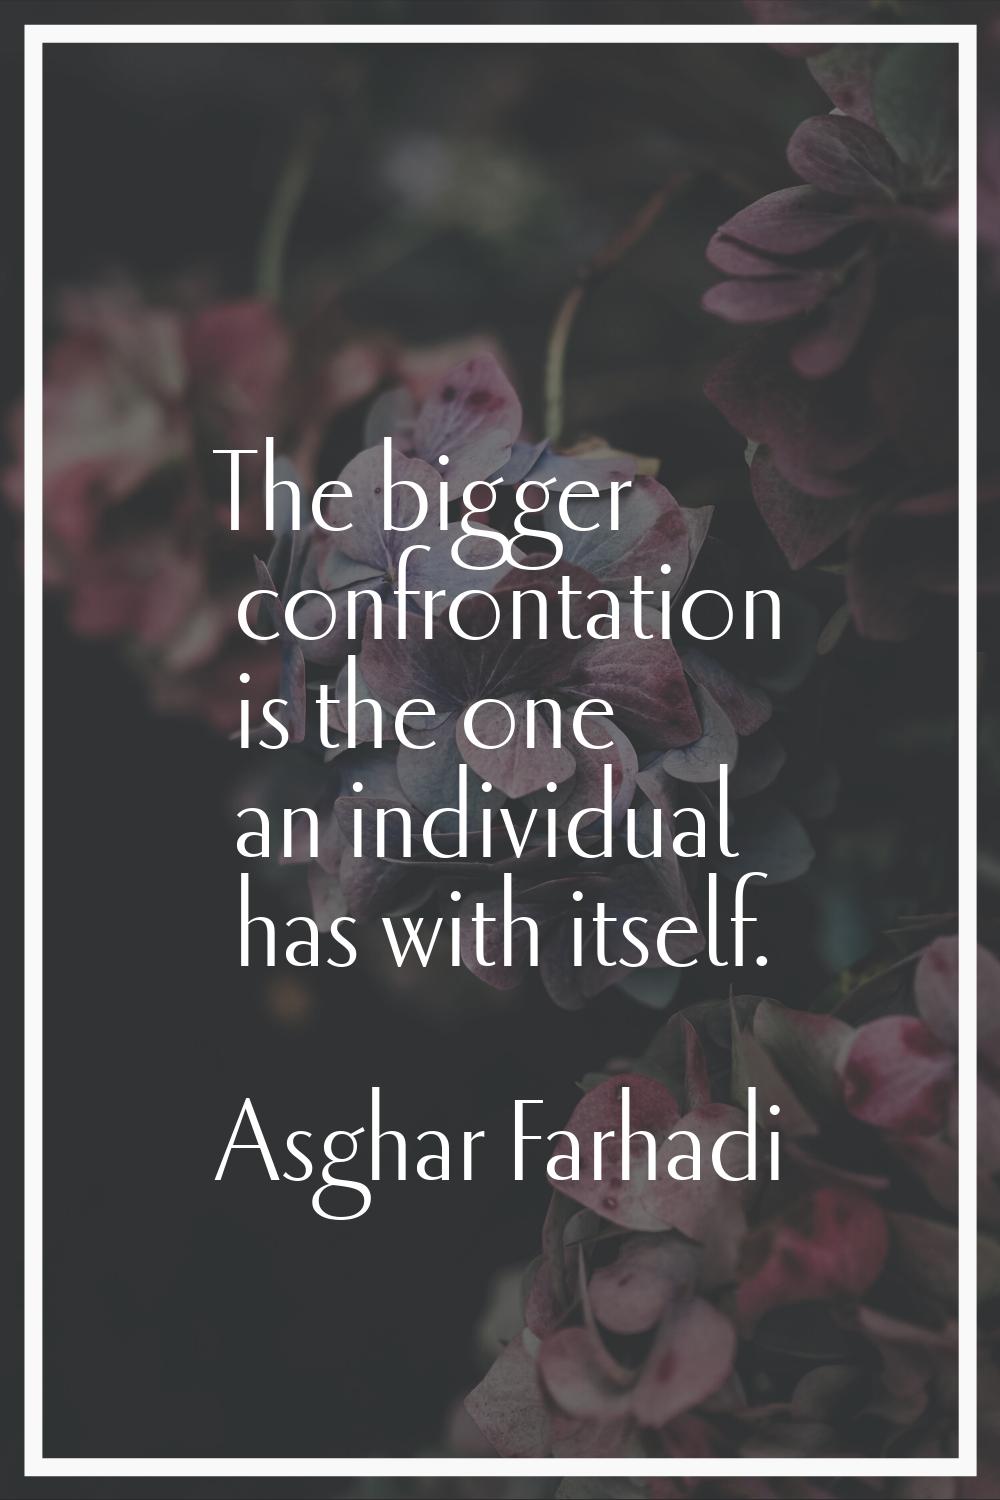 The bigger confrontation is the one an individual has with itself.